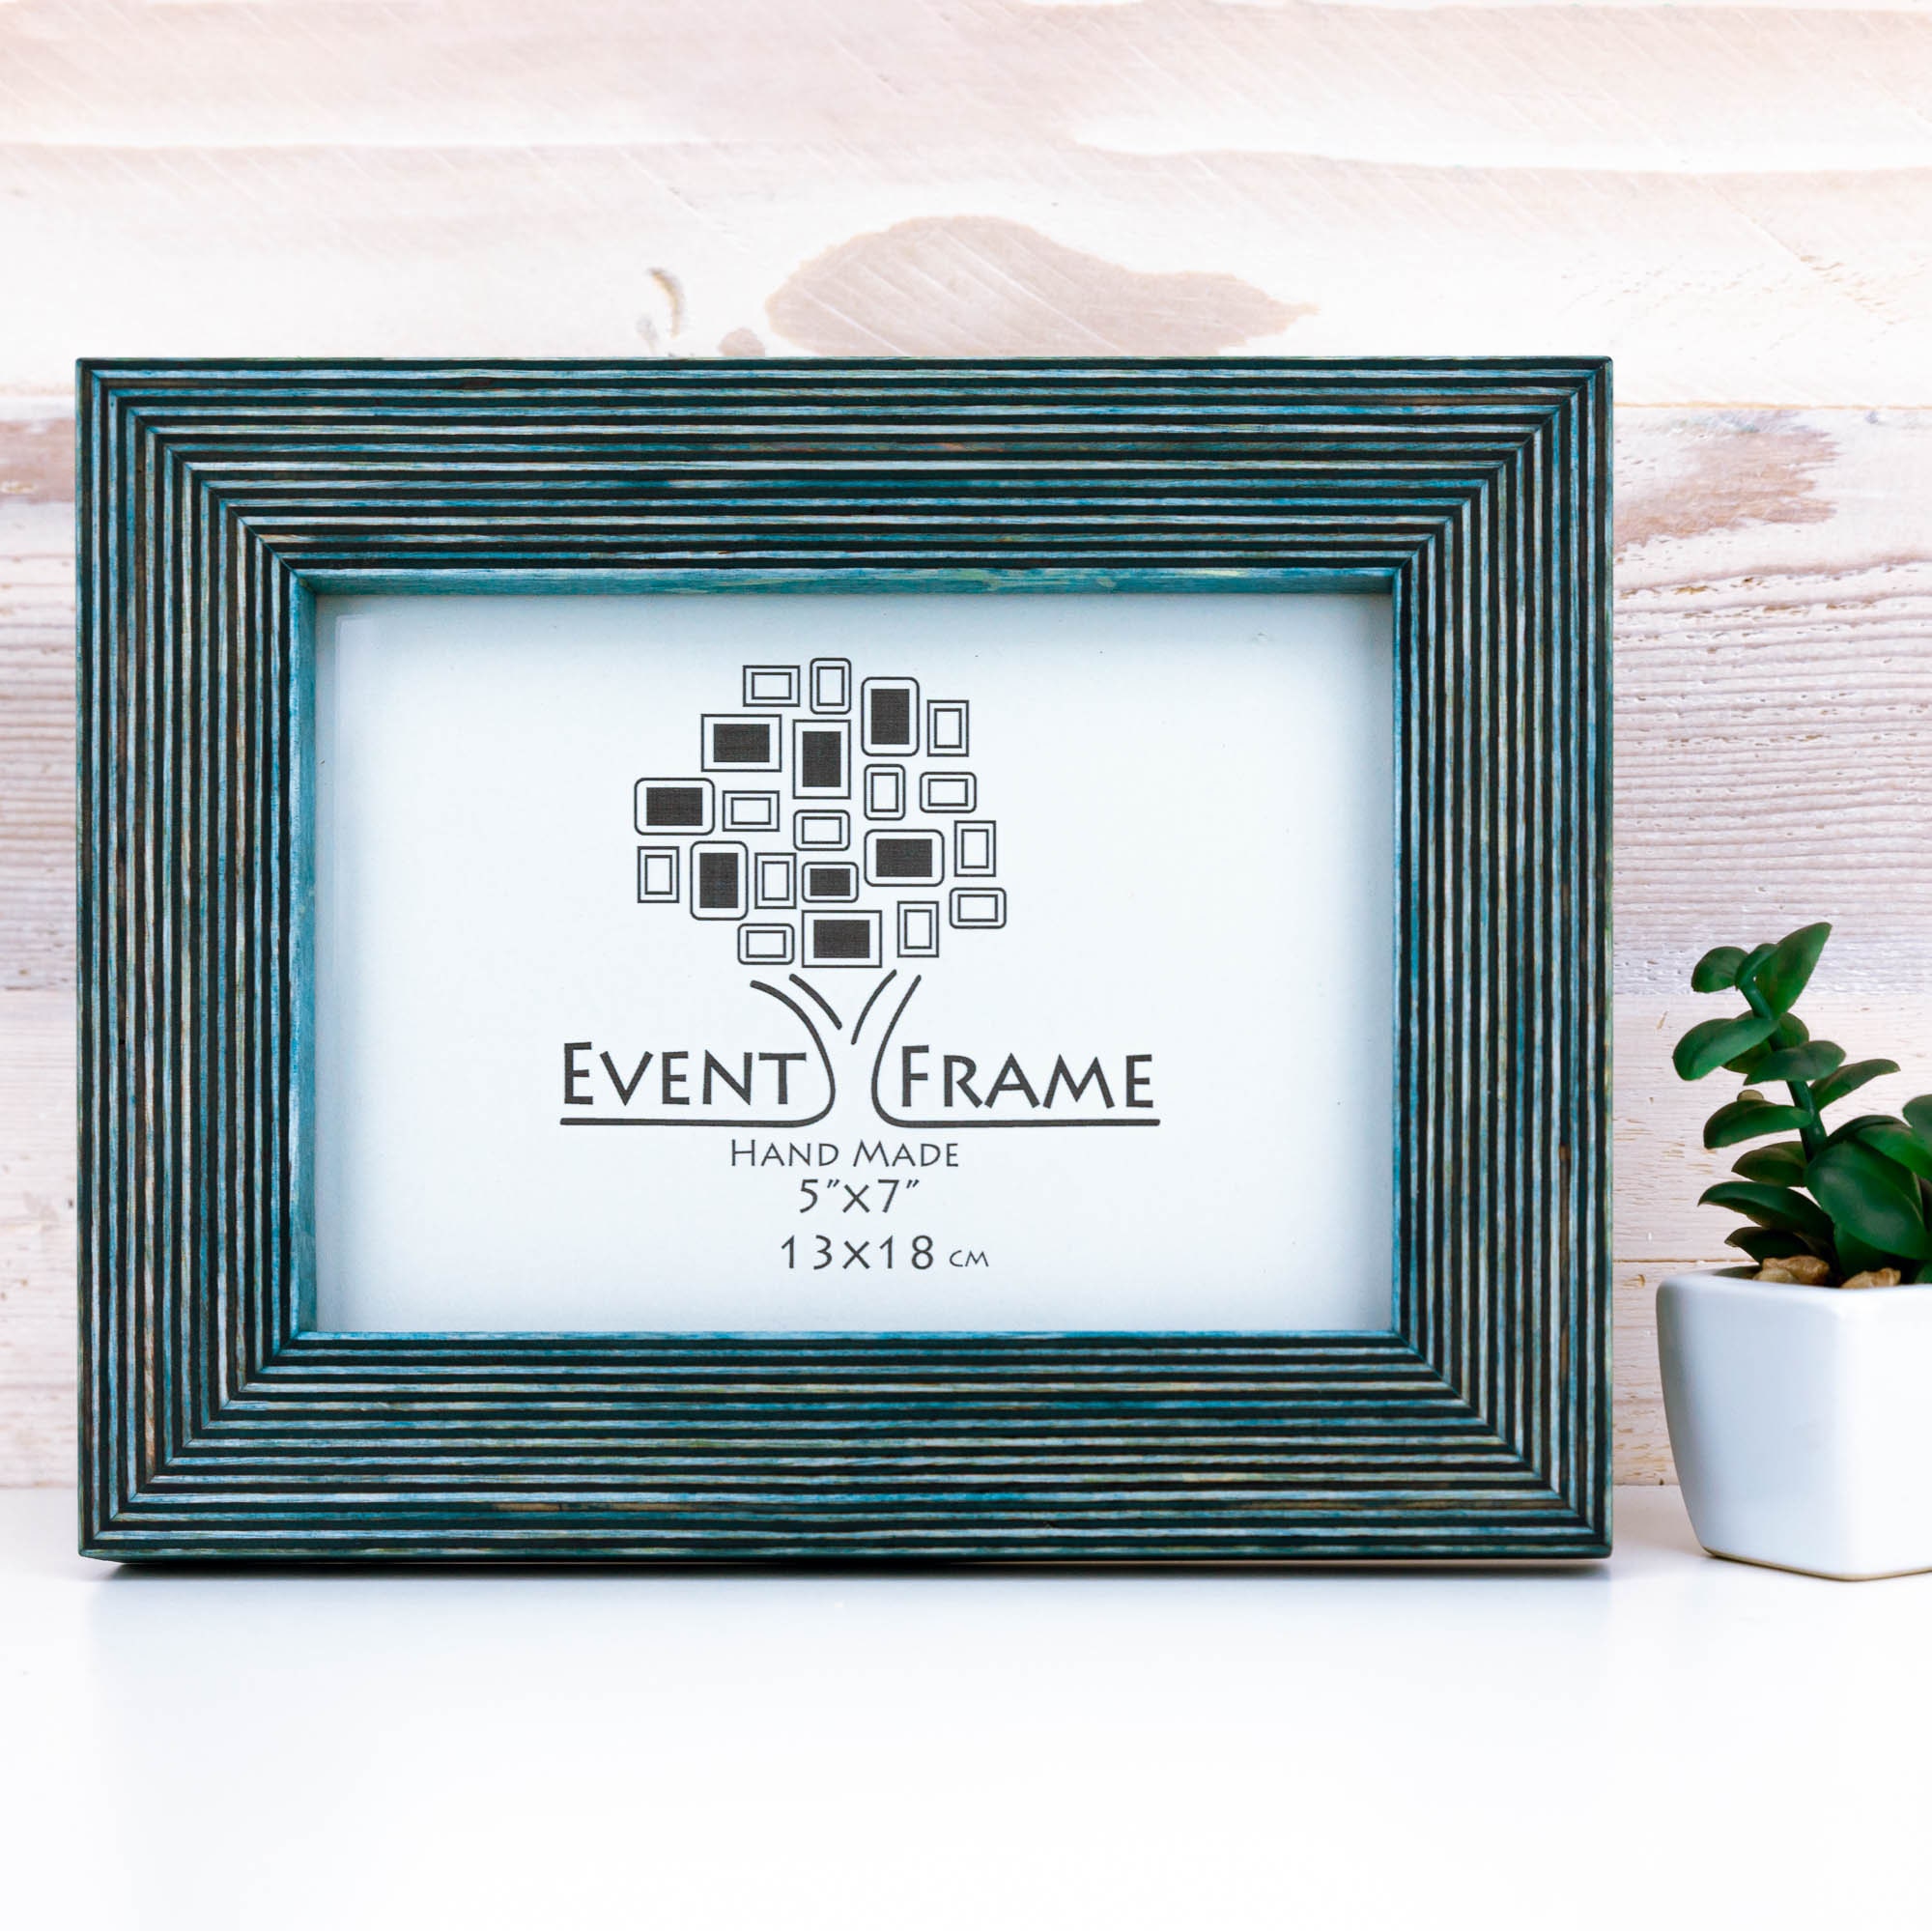 CustomPictureFrames.com 12x12 Frame Black Real Wood Picture Frame Width 1.5 Inches | Interior Frame Depth 0.5 Inches | Sonoma Gold Distressed Photo